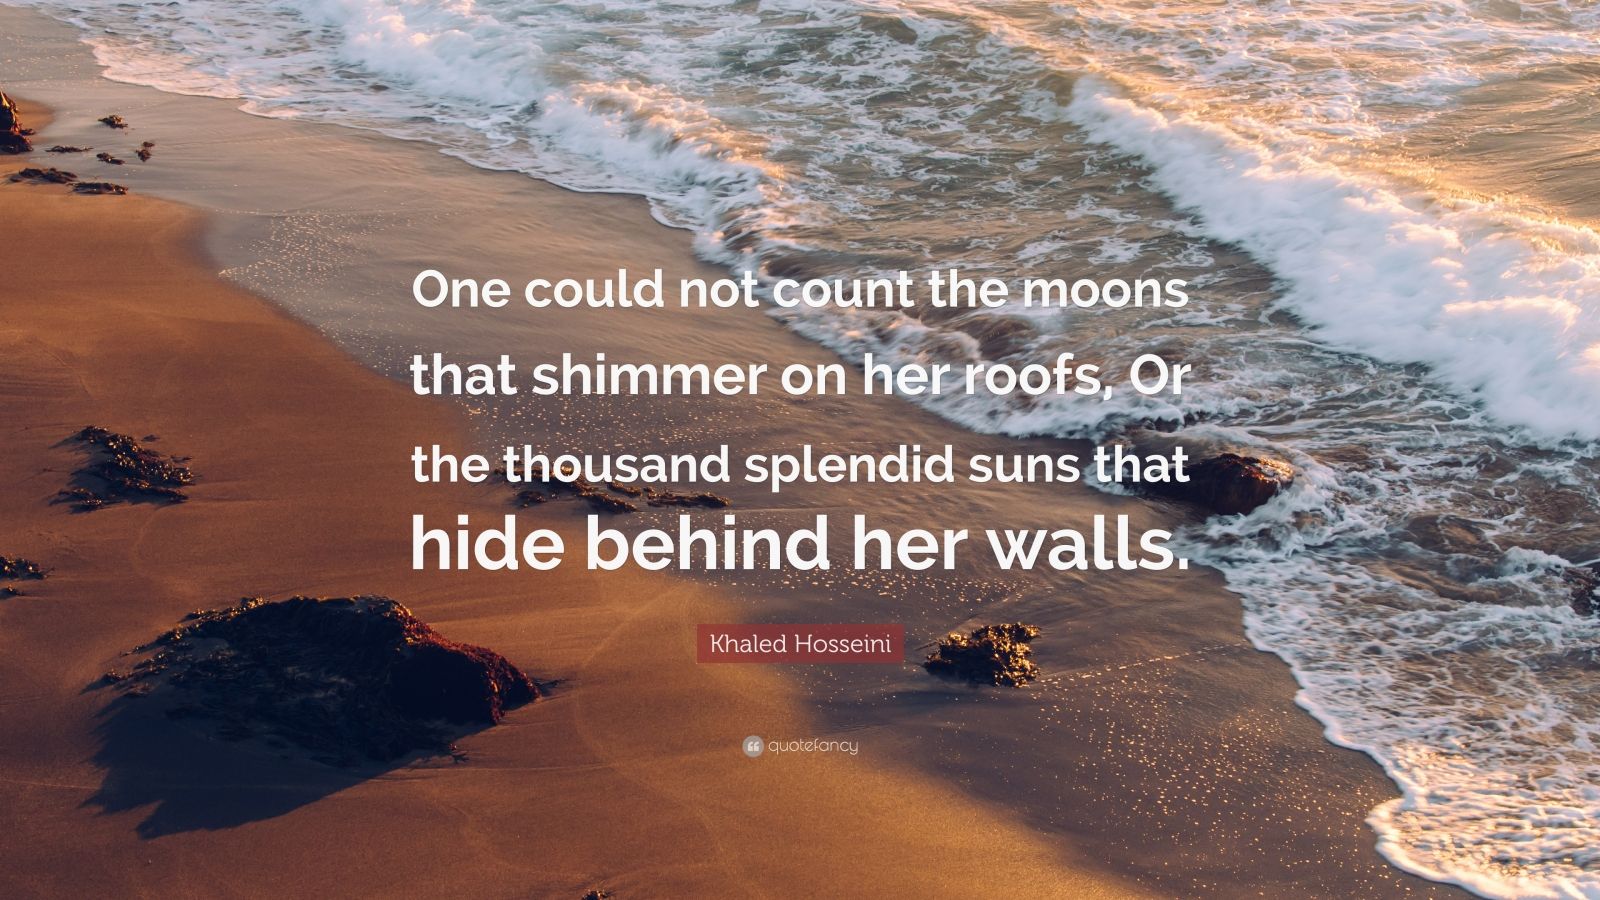 Khaled Hosseini Quote “one Could Not Count The Moons That Shimmer On Her Roofs Or The Thousand